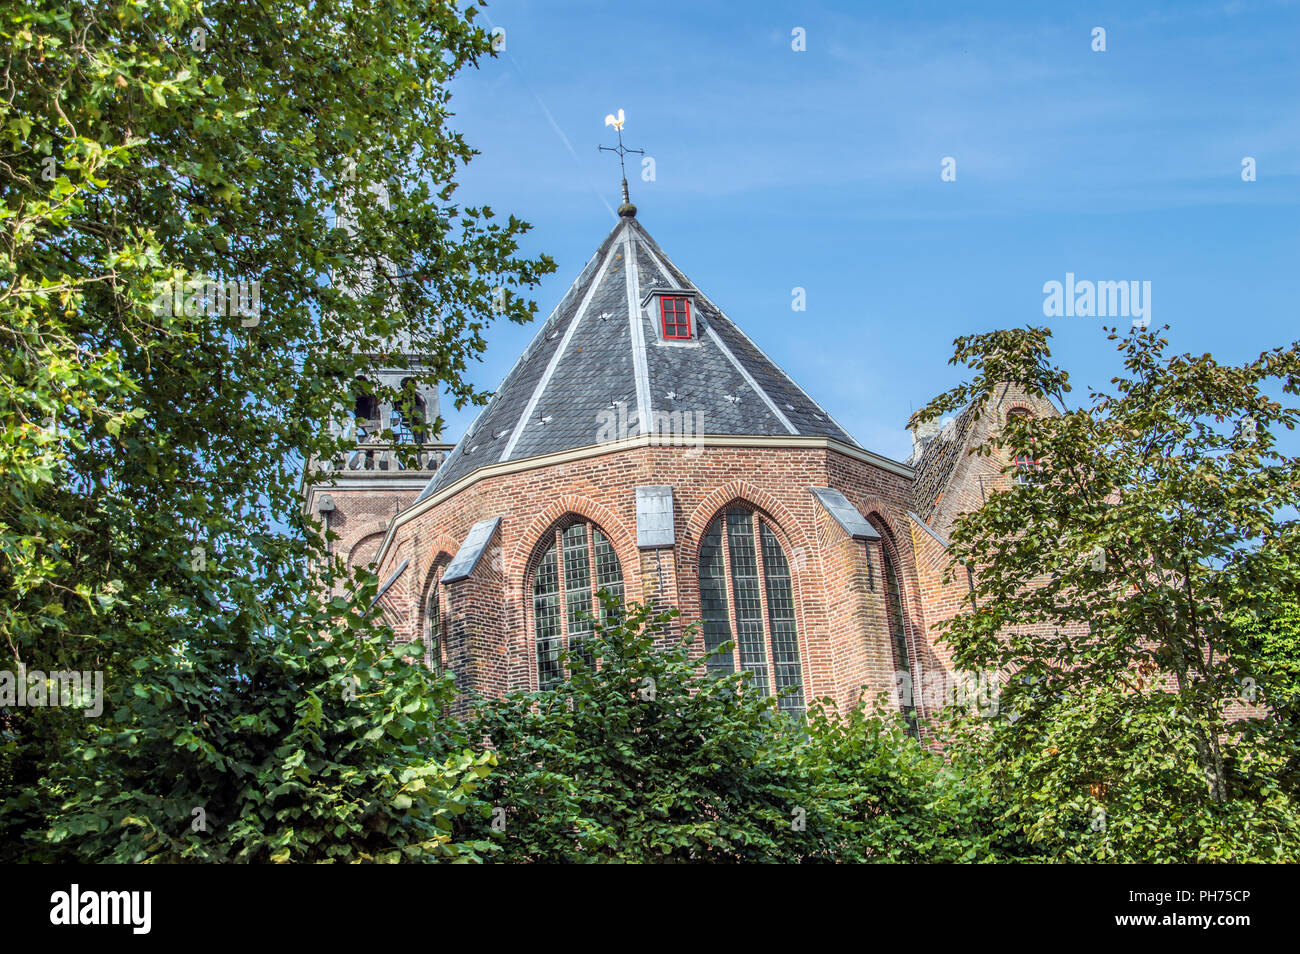 The Protestant Church At Broek In Waterland The Netherlands 2018 Behind The Trees Stock Photo